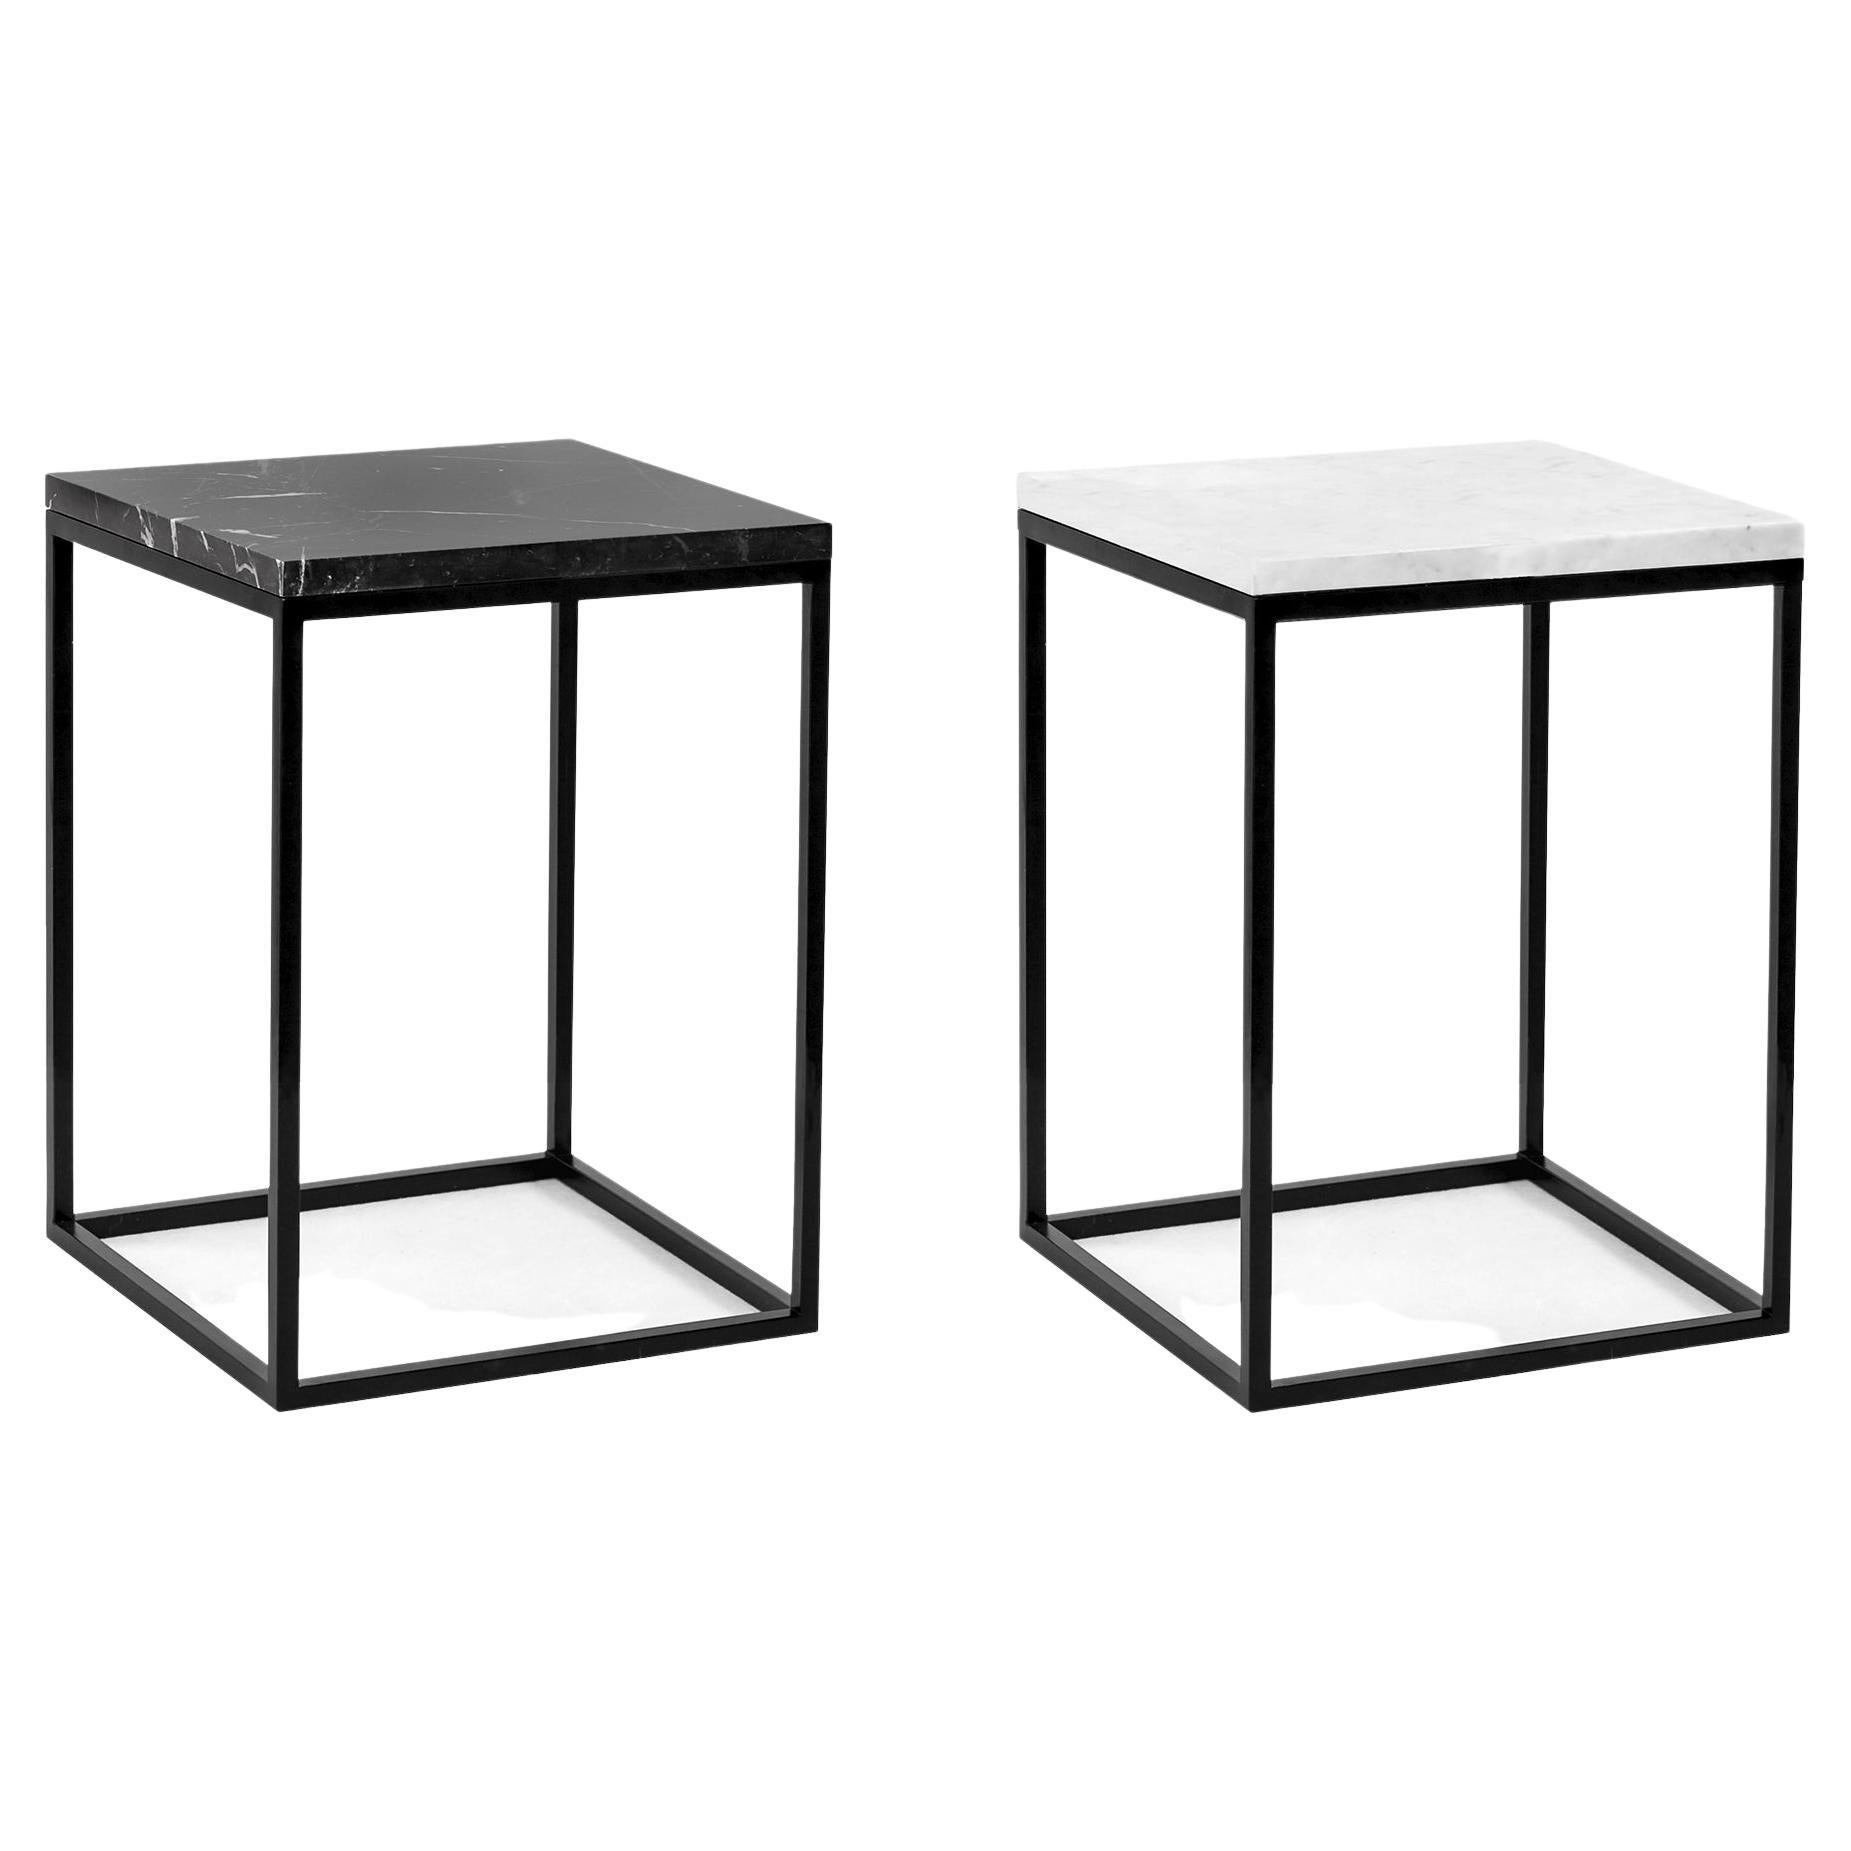 Set of 2 Small Pillar Side Tables by Un’common